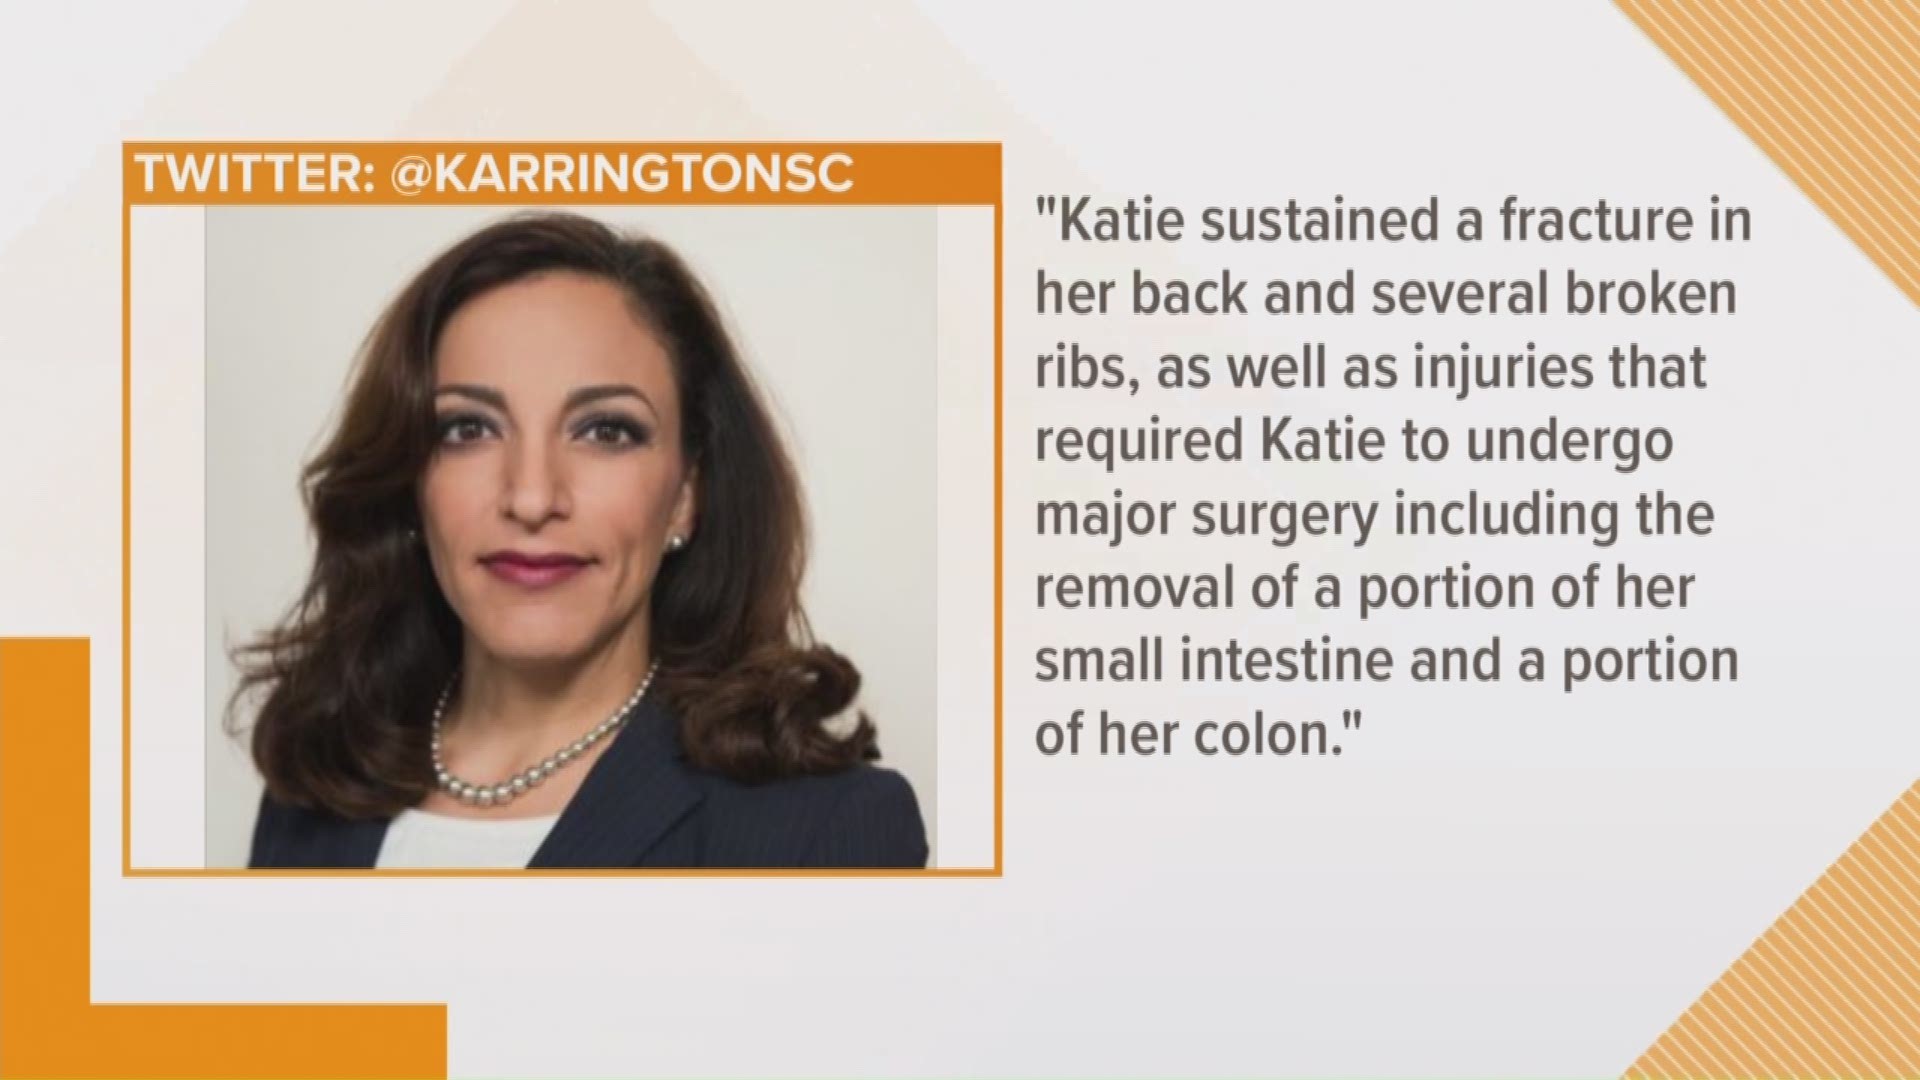 State Representative Katie Arrington has undergone surgery after a car crash left her with serious injuries.